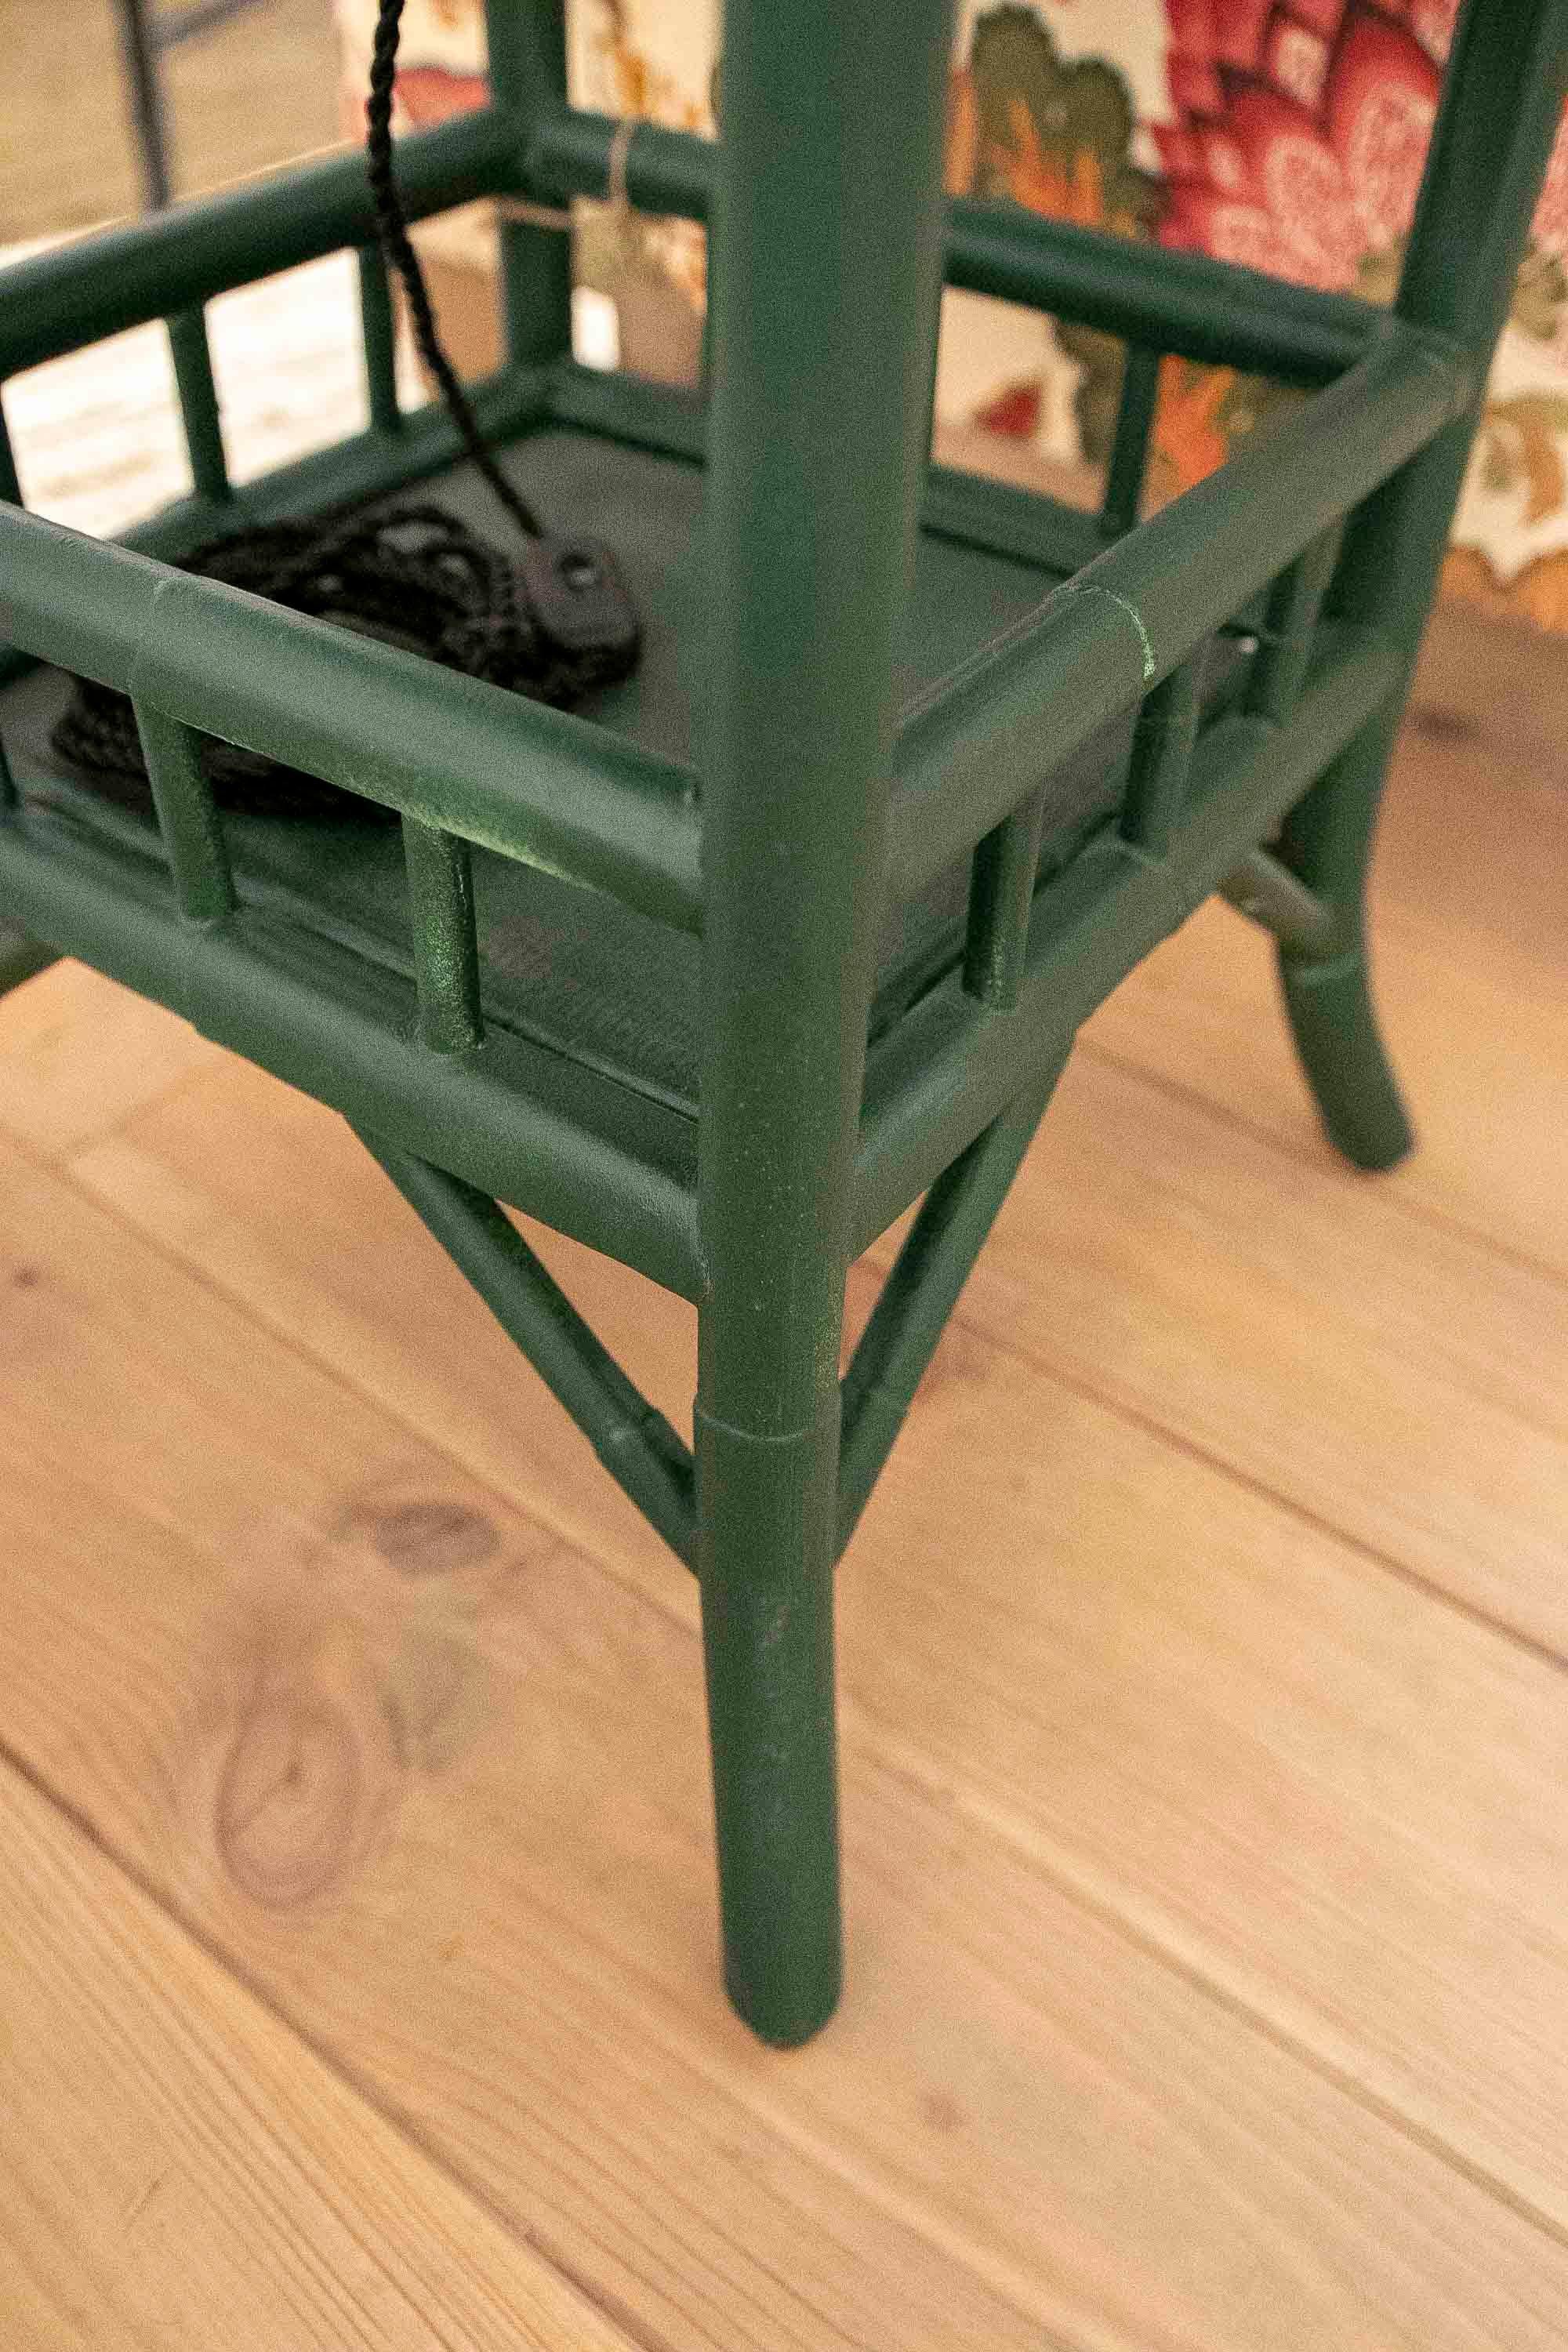 Bamboo and Wicker Floor Lamp with Three Shelves Painted in Green Tones 6